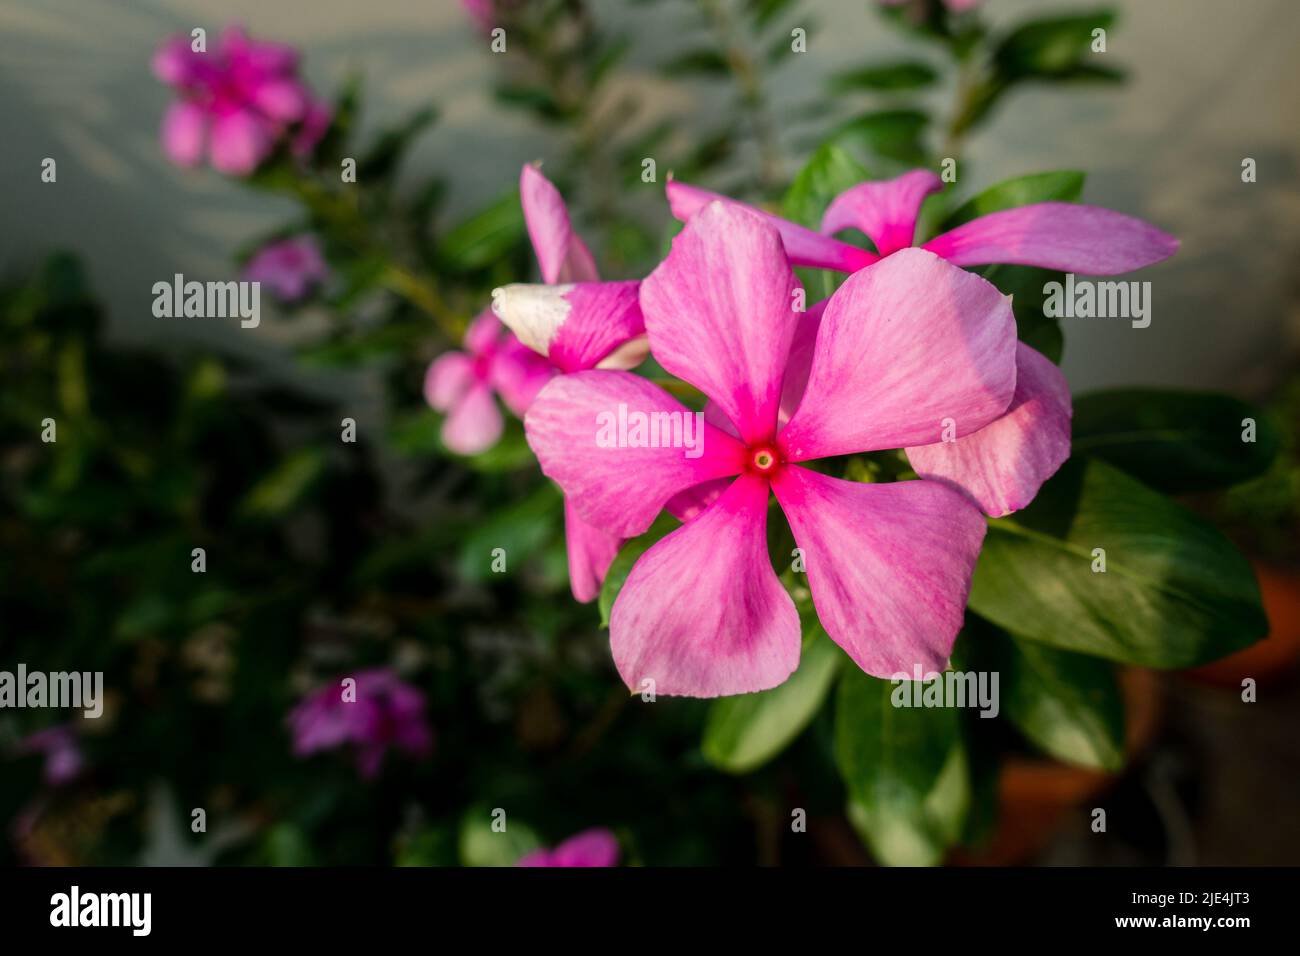 Madagascar Periwinkle, Catharanthus roseus, commonly known as bright eyes, is a species of flowering plant in the family Apocynaceae. Indian Garden Stock Photo